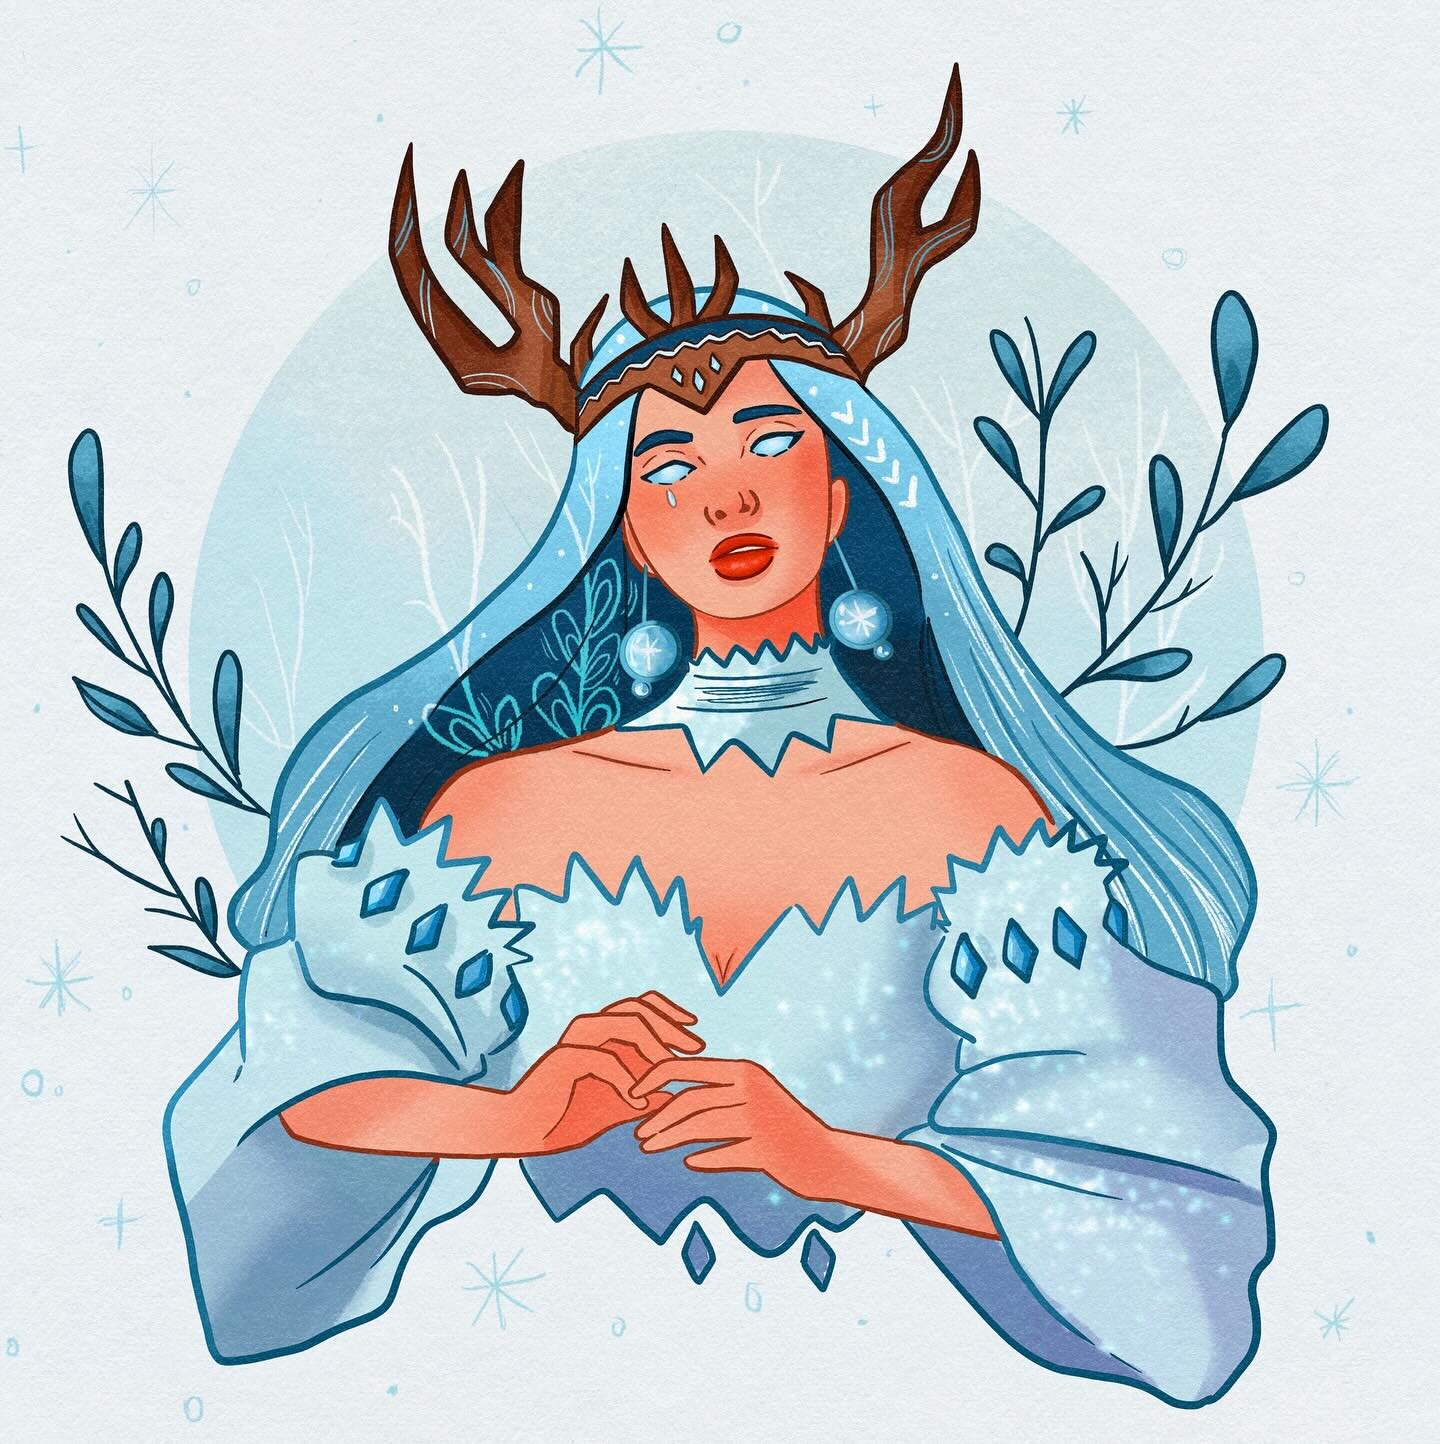 I had the Christmas gift of being able to draw for myself and finish @_lady_moira_ #dtiysladymoira challenge. Love the original and wintery design of the original 💙❄️ Merry Christmas 🎅🎄

#dtiyschallenge #drawthisinyourstyle #dtiys #procreateart #p